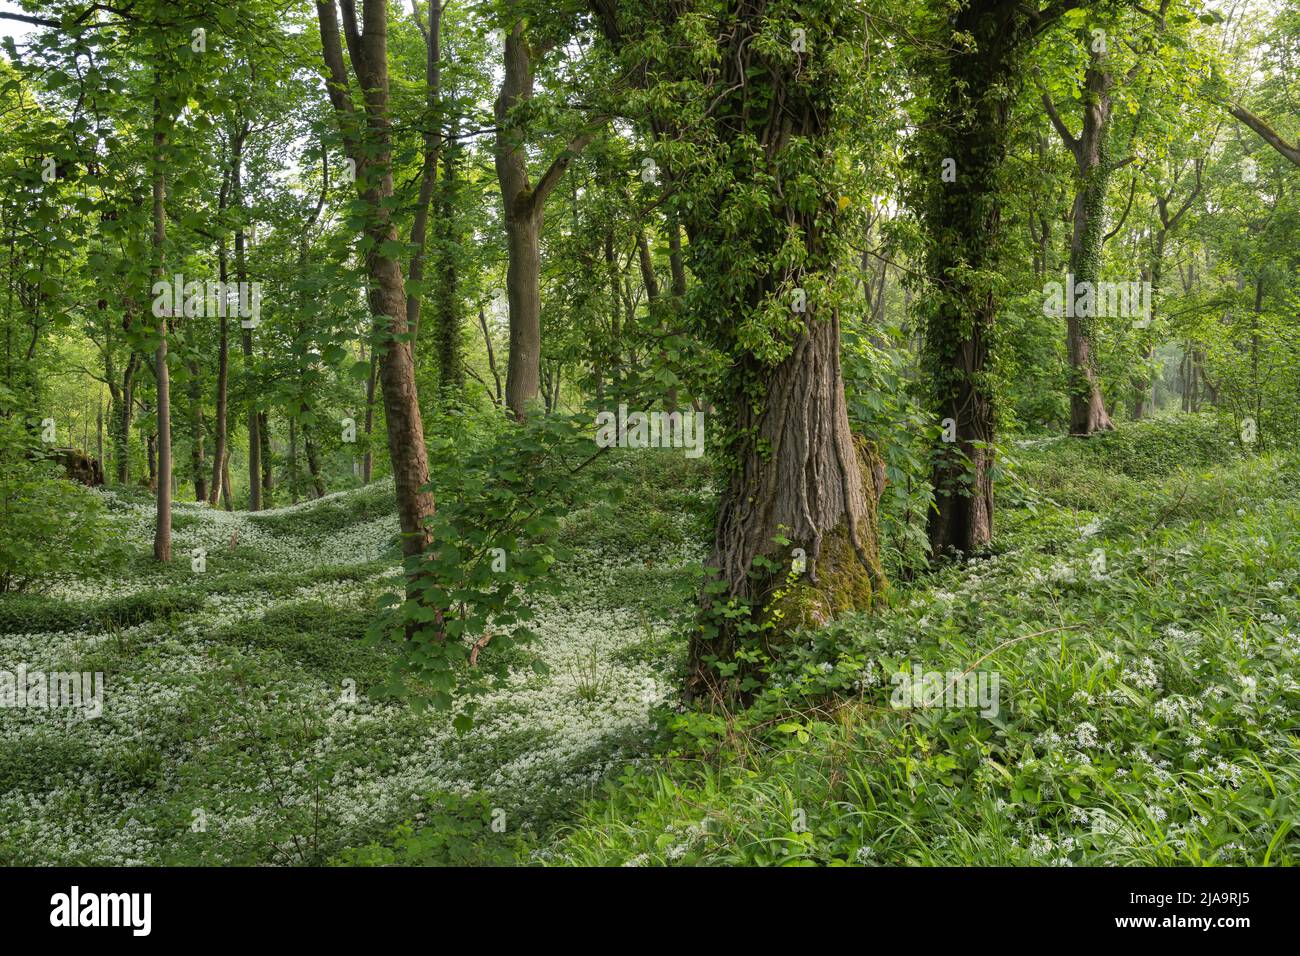 Wild Garlic or Ramsons (Allium ursinum) growing in a North Cotswold wood, England. Stock Photo